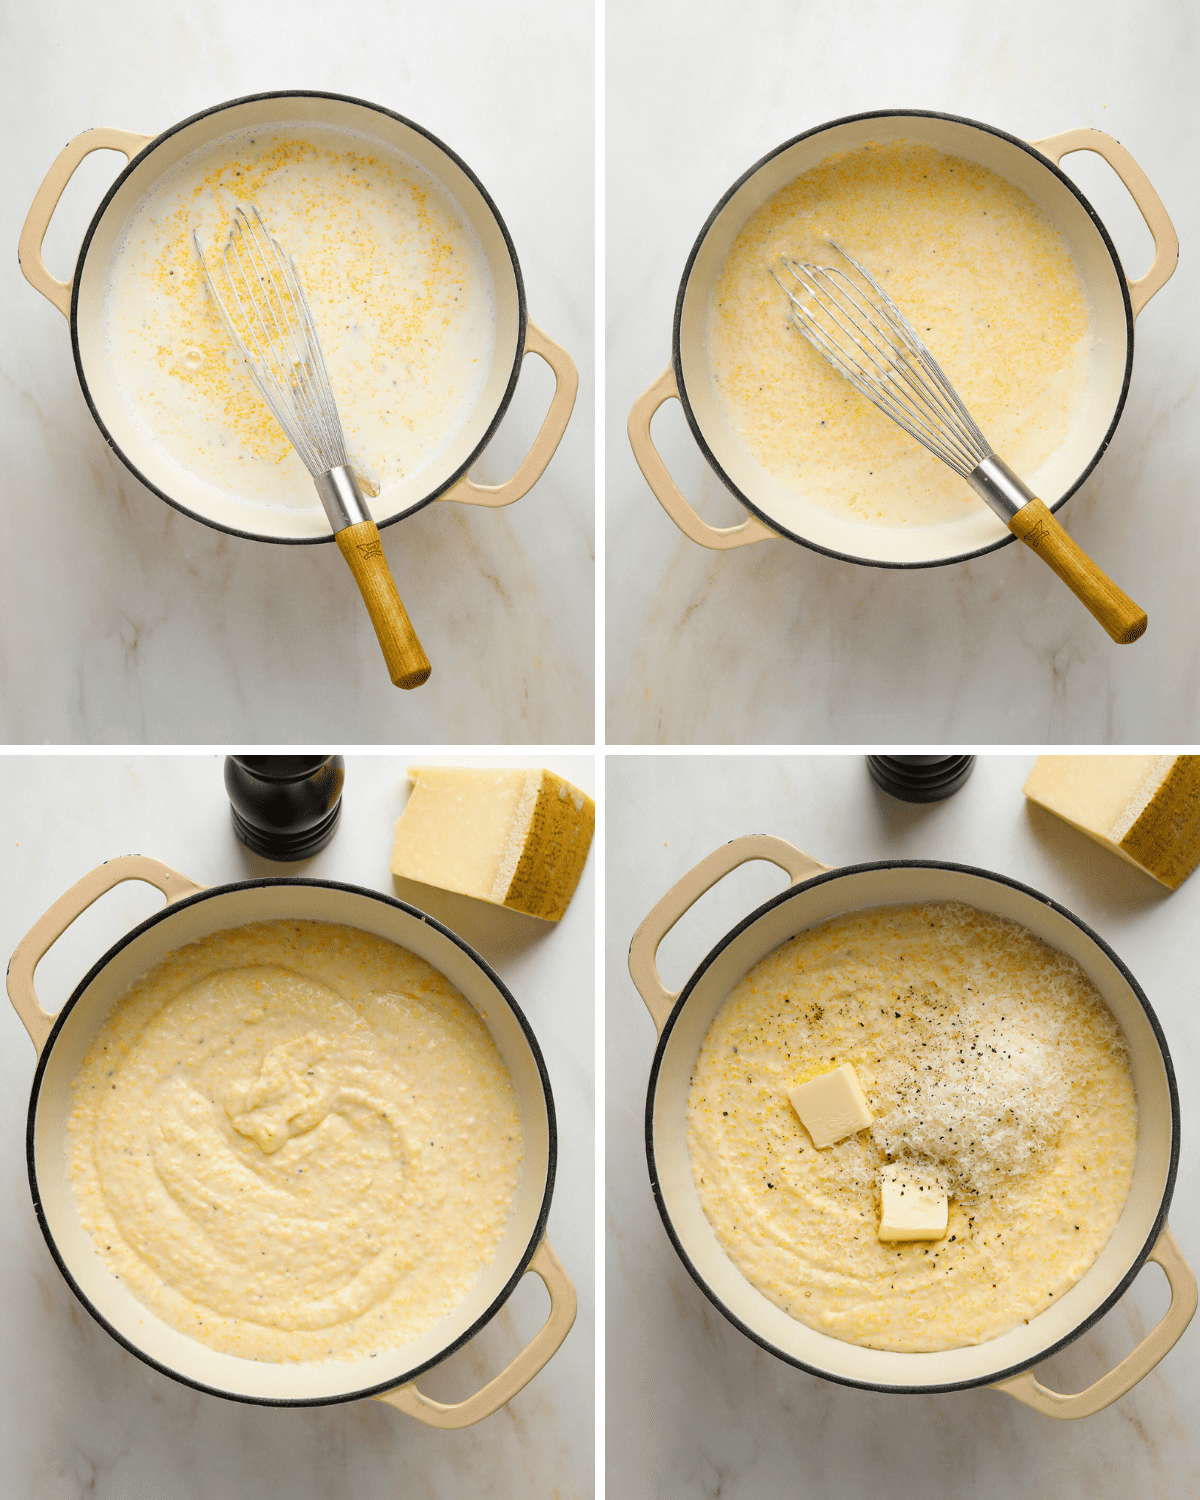 Four step by step images showing how to make polenta; 1. hot milk in a pot with a whisk, 2. polenta in a pot, 3. cooked polenta in a pot with pads of butter and grated cheese.